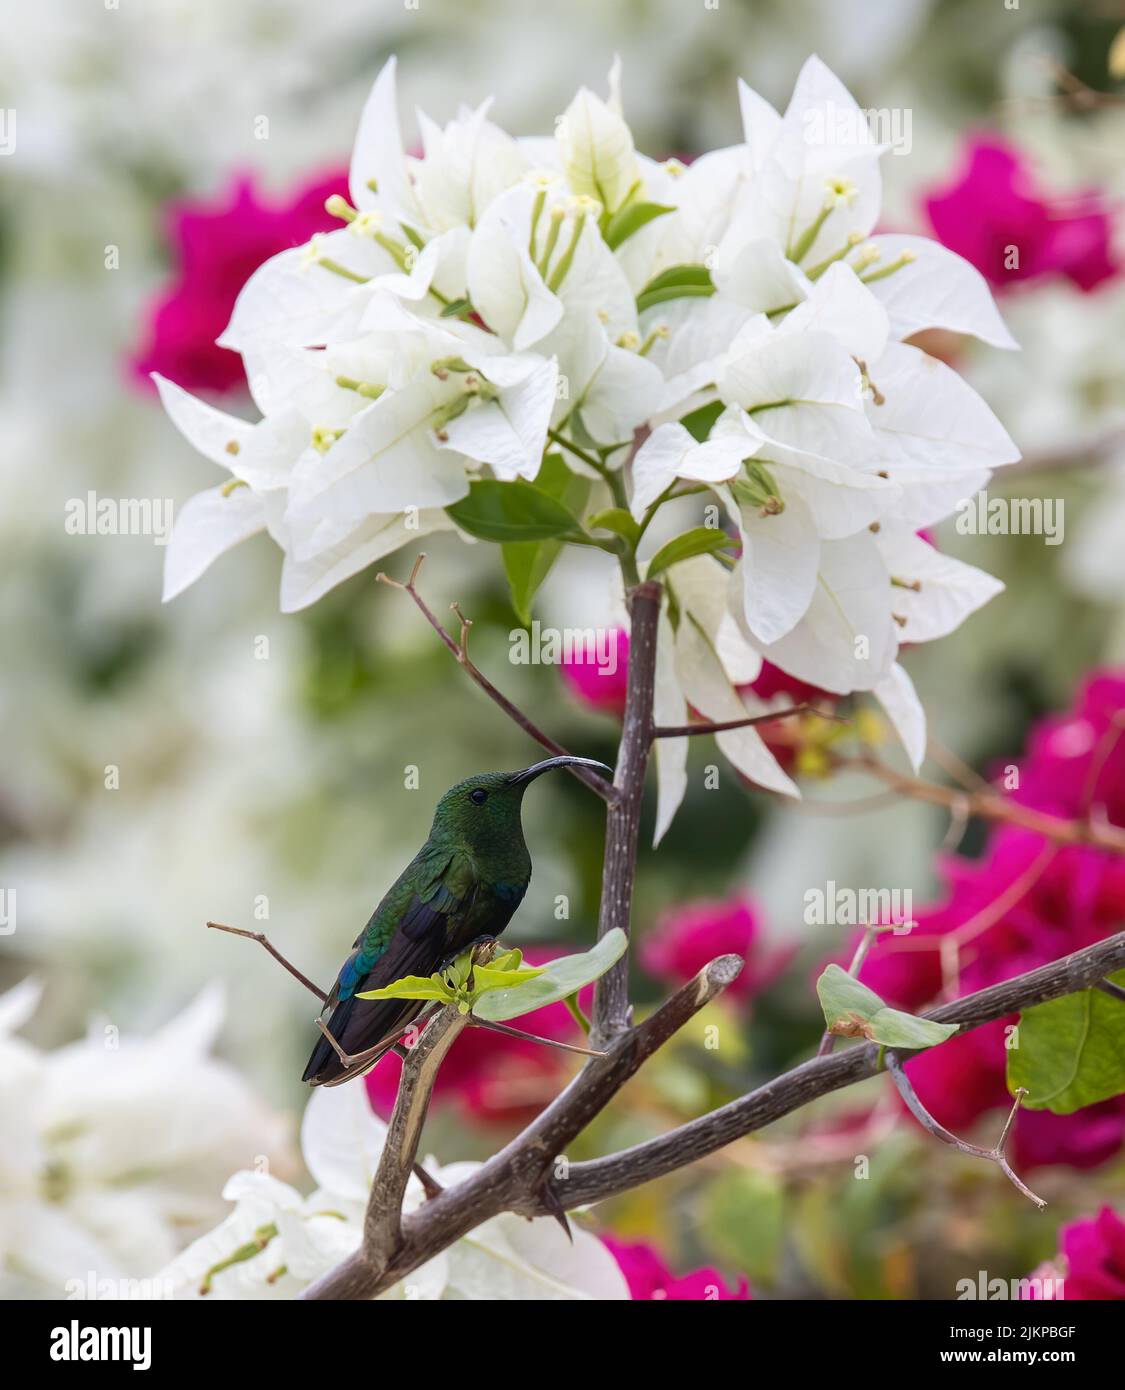 a close up shot of Green-throated carib bird on a branch under the Bougainvillea spectabilis flower Stock Photo